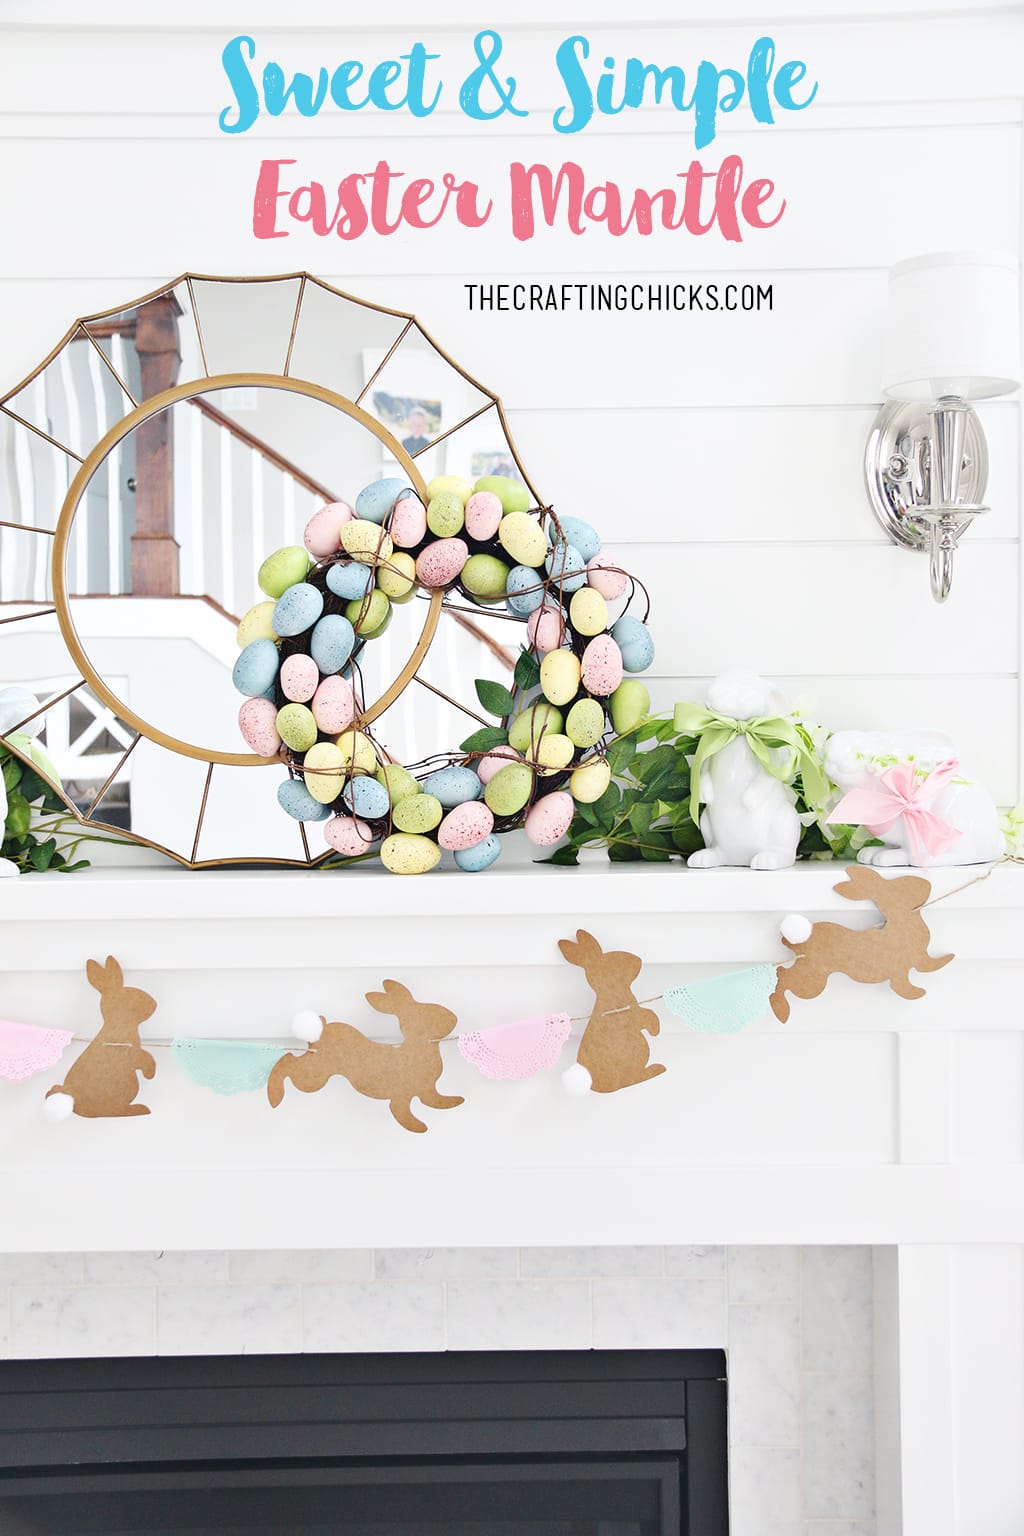 Sweet & Simple Easter Mantle for Easter Decor Inspiration this year! Sweet touches to create a simple Easter Mantle with pastel colors.